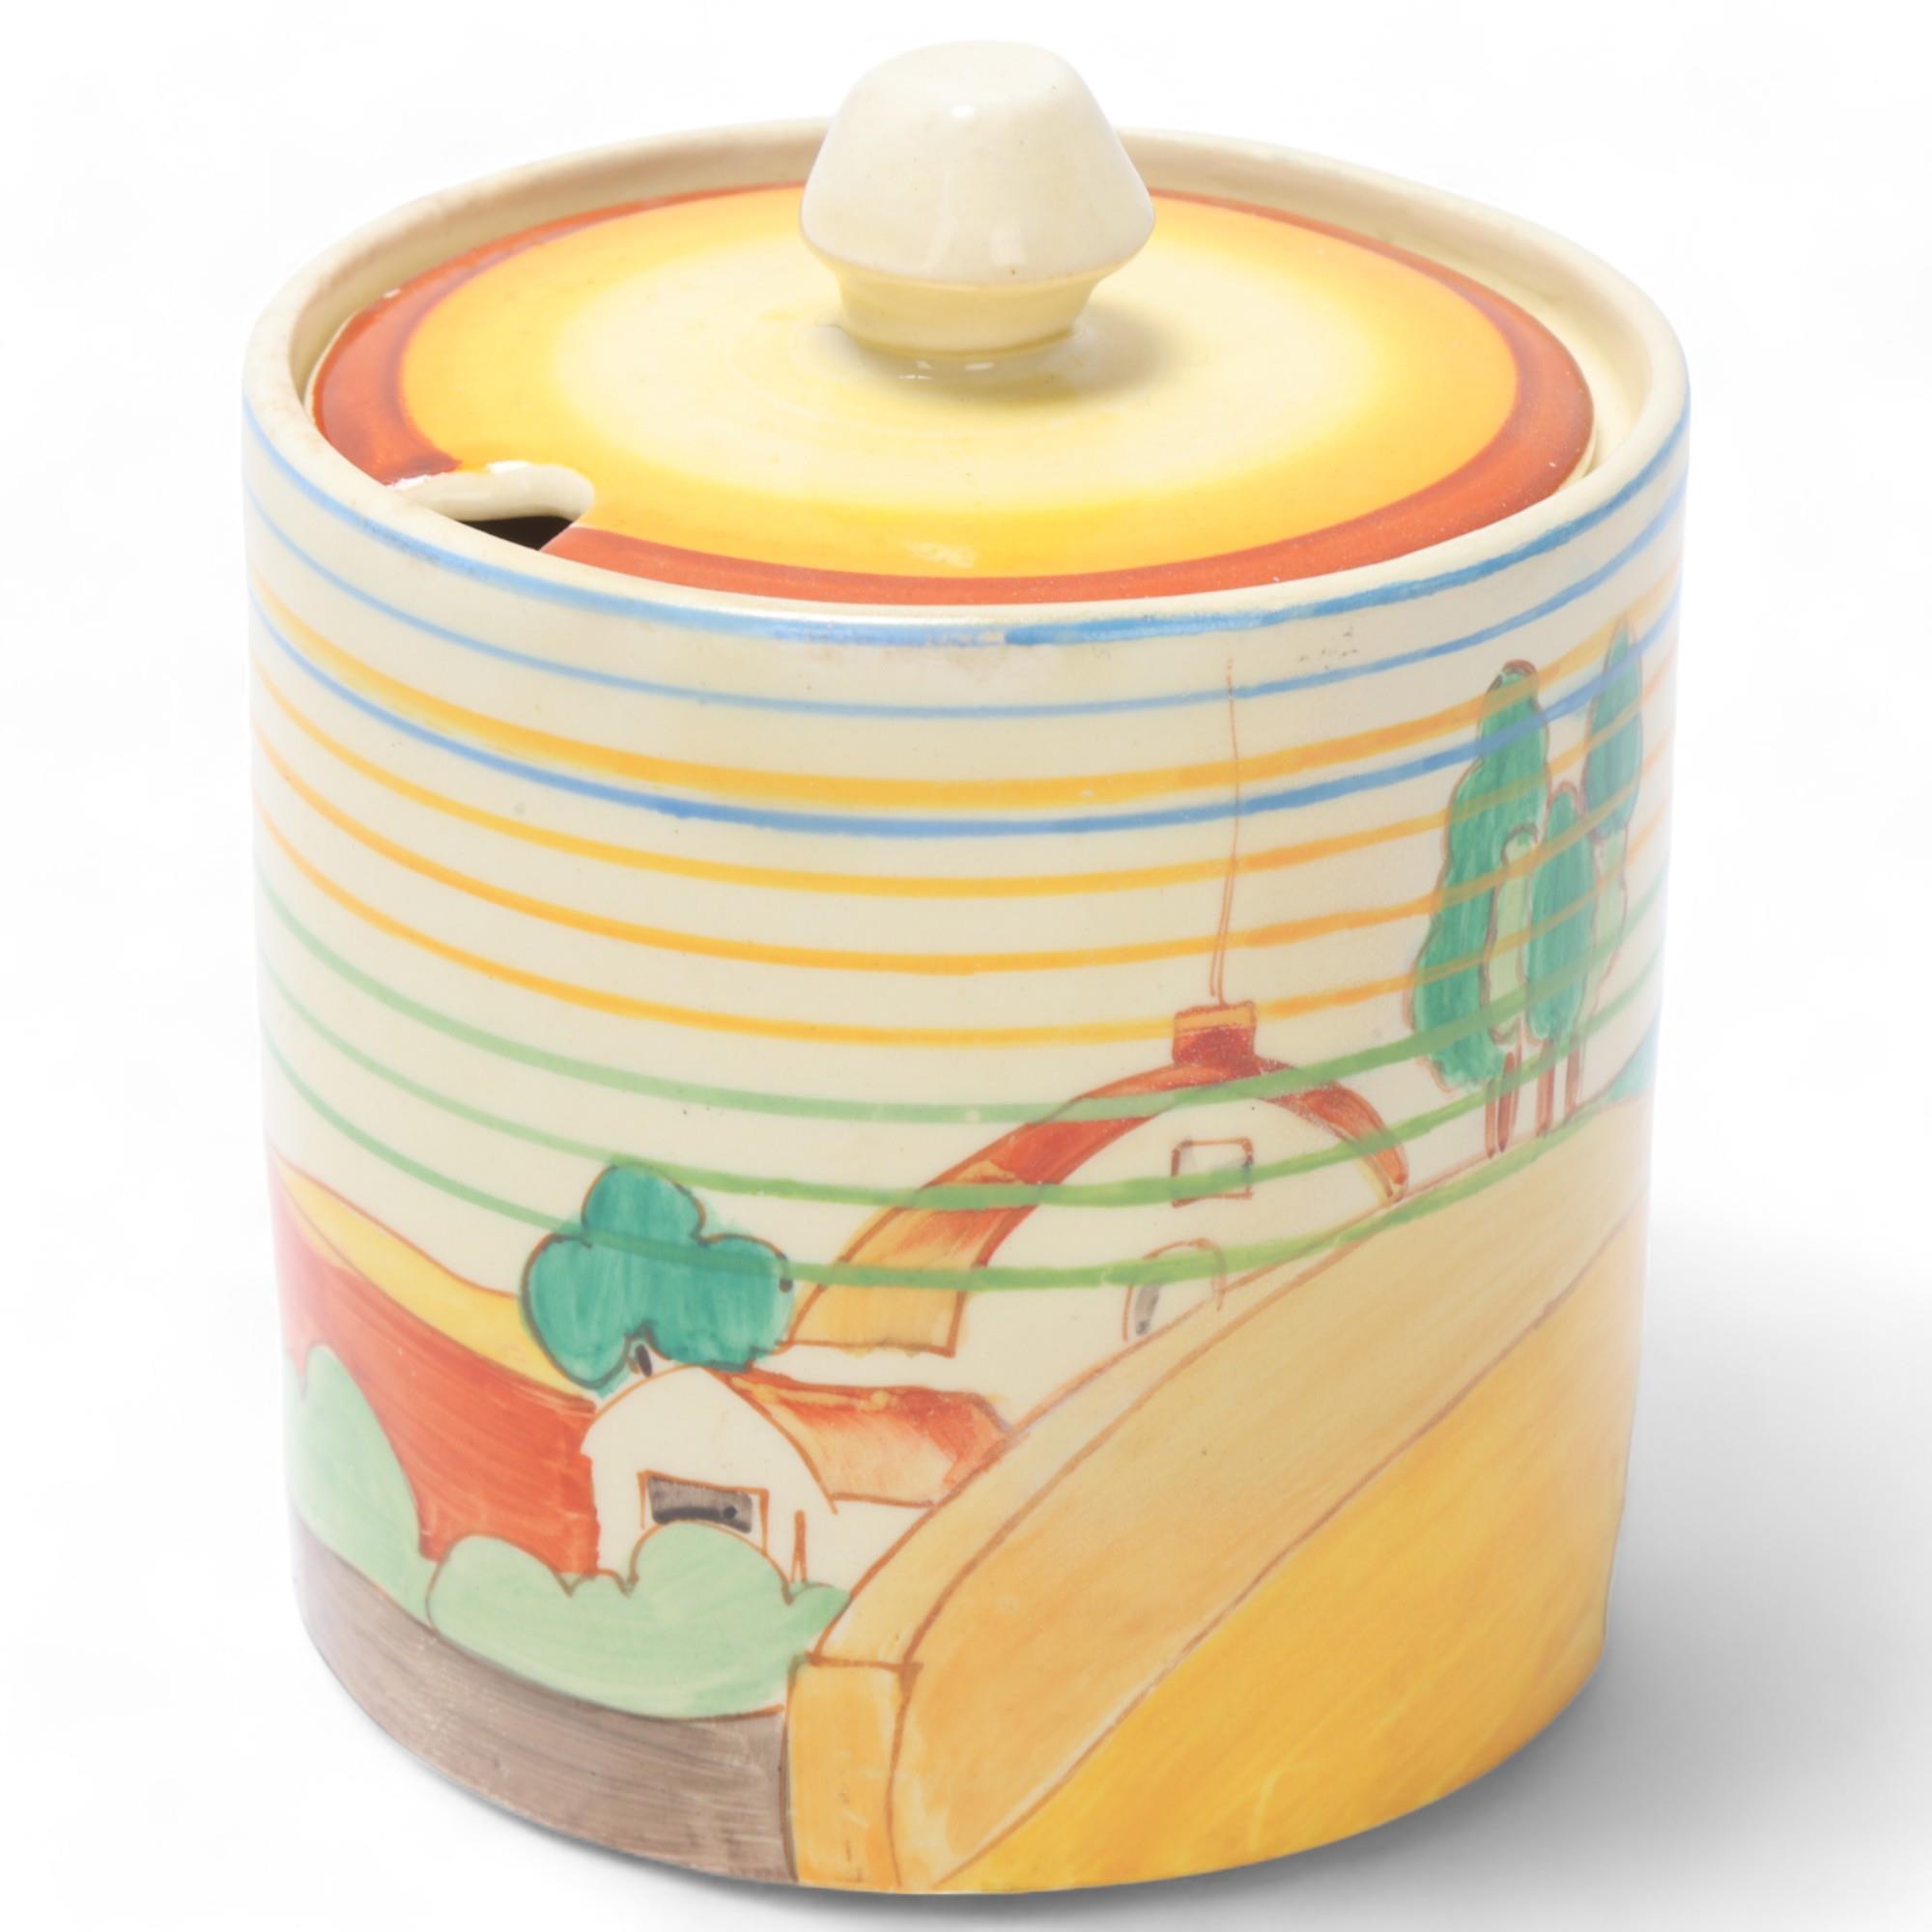 Clarice Cliff Bizarre drum-shaped preserve pot and cover, height 9cm Good condition, no chips cracks